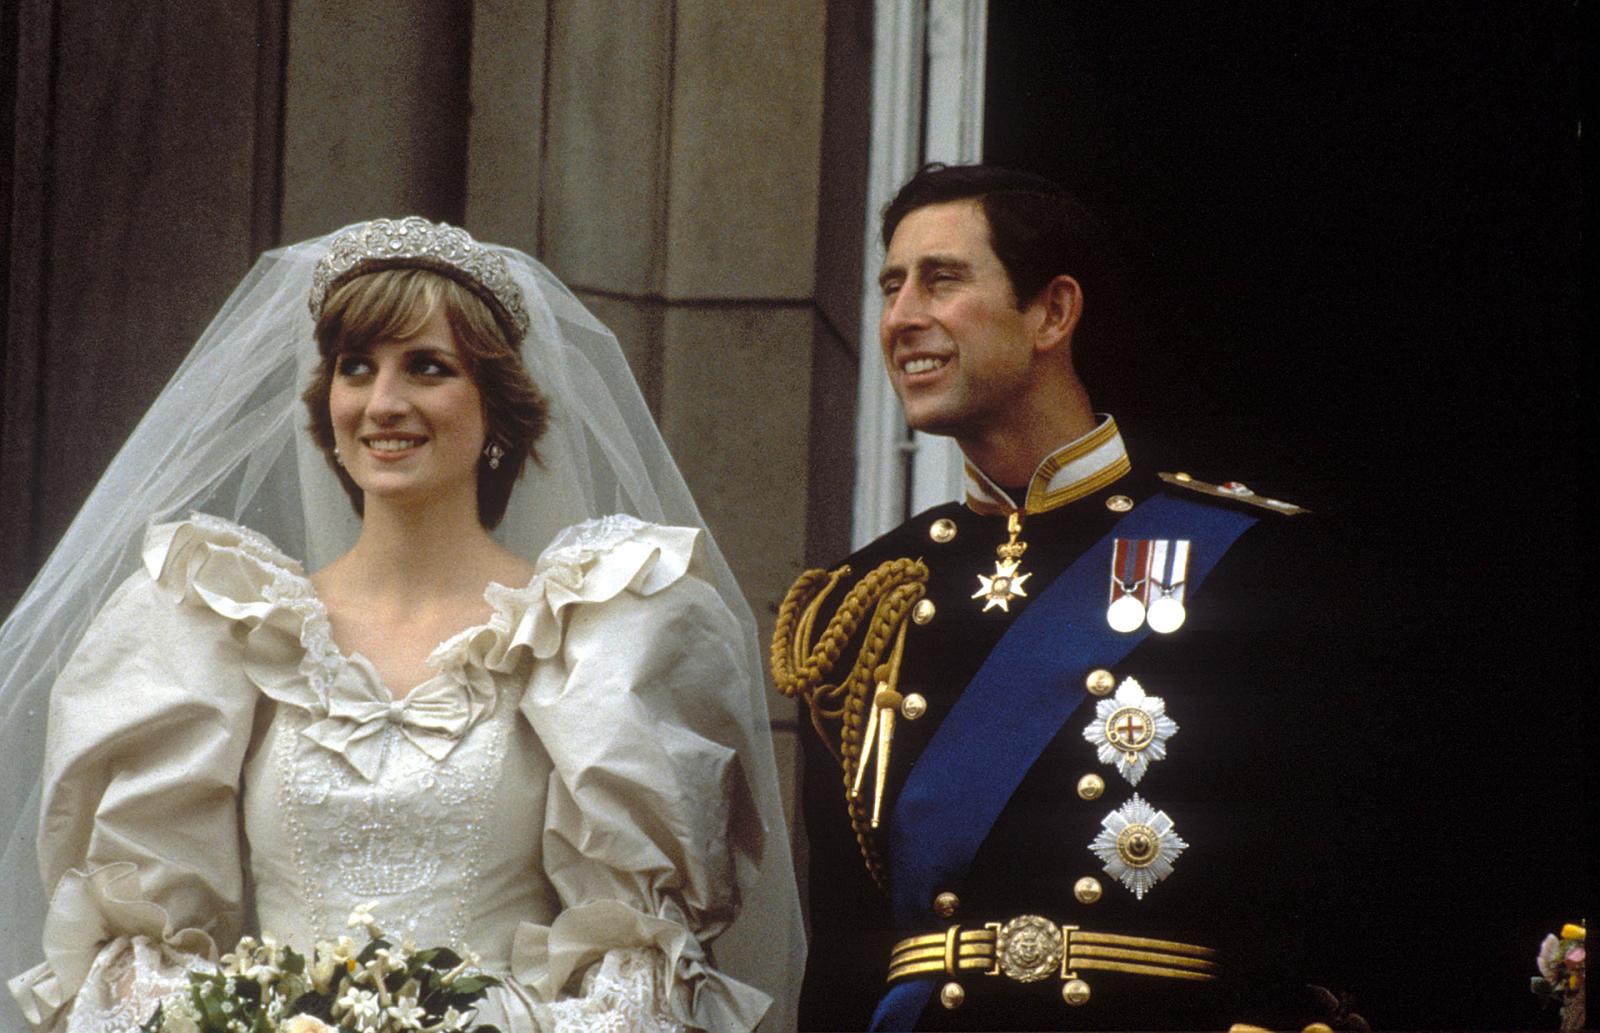 These 6 Royal Weddings Will Leave You Speechless (and Maybe a Little Envious) - image 6